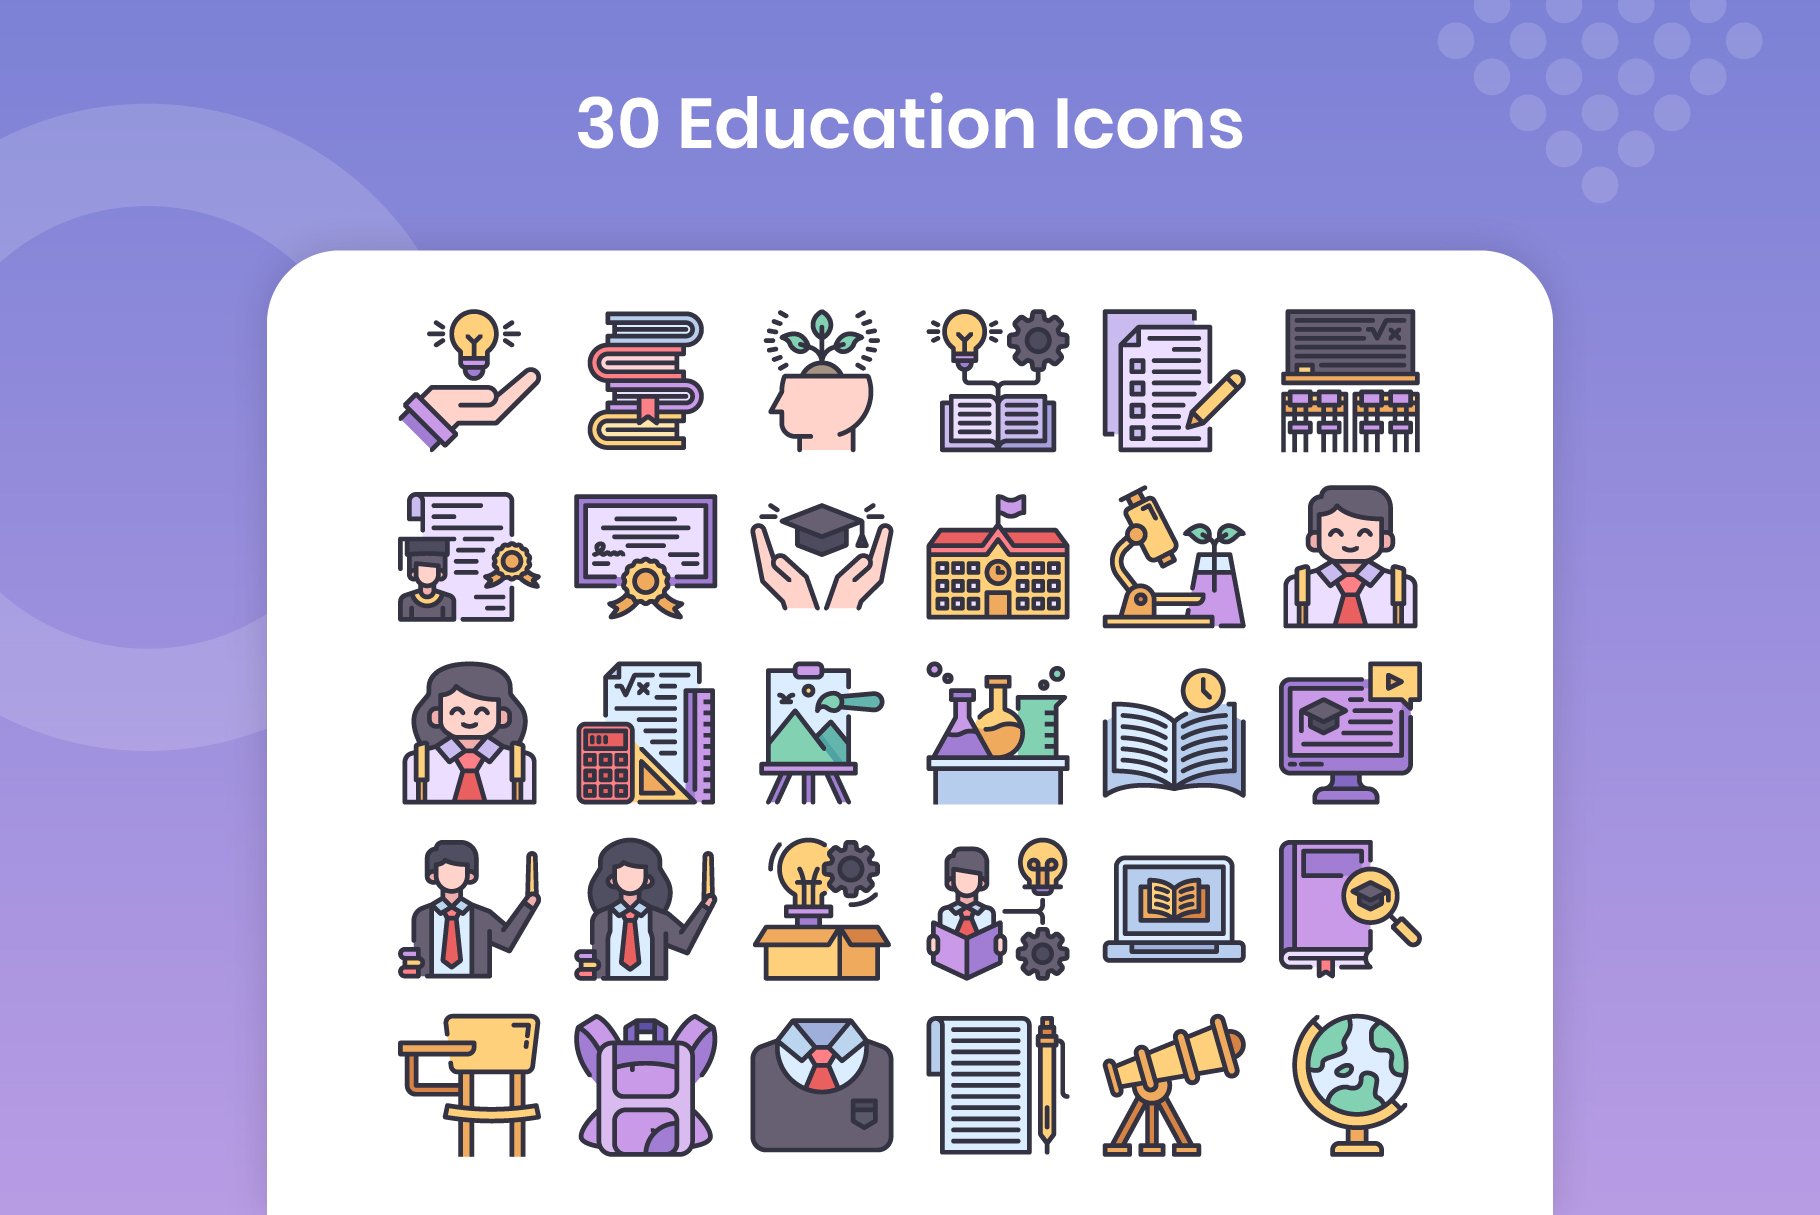 30 Education Icons - Filled Line preview image.